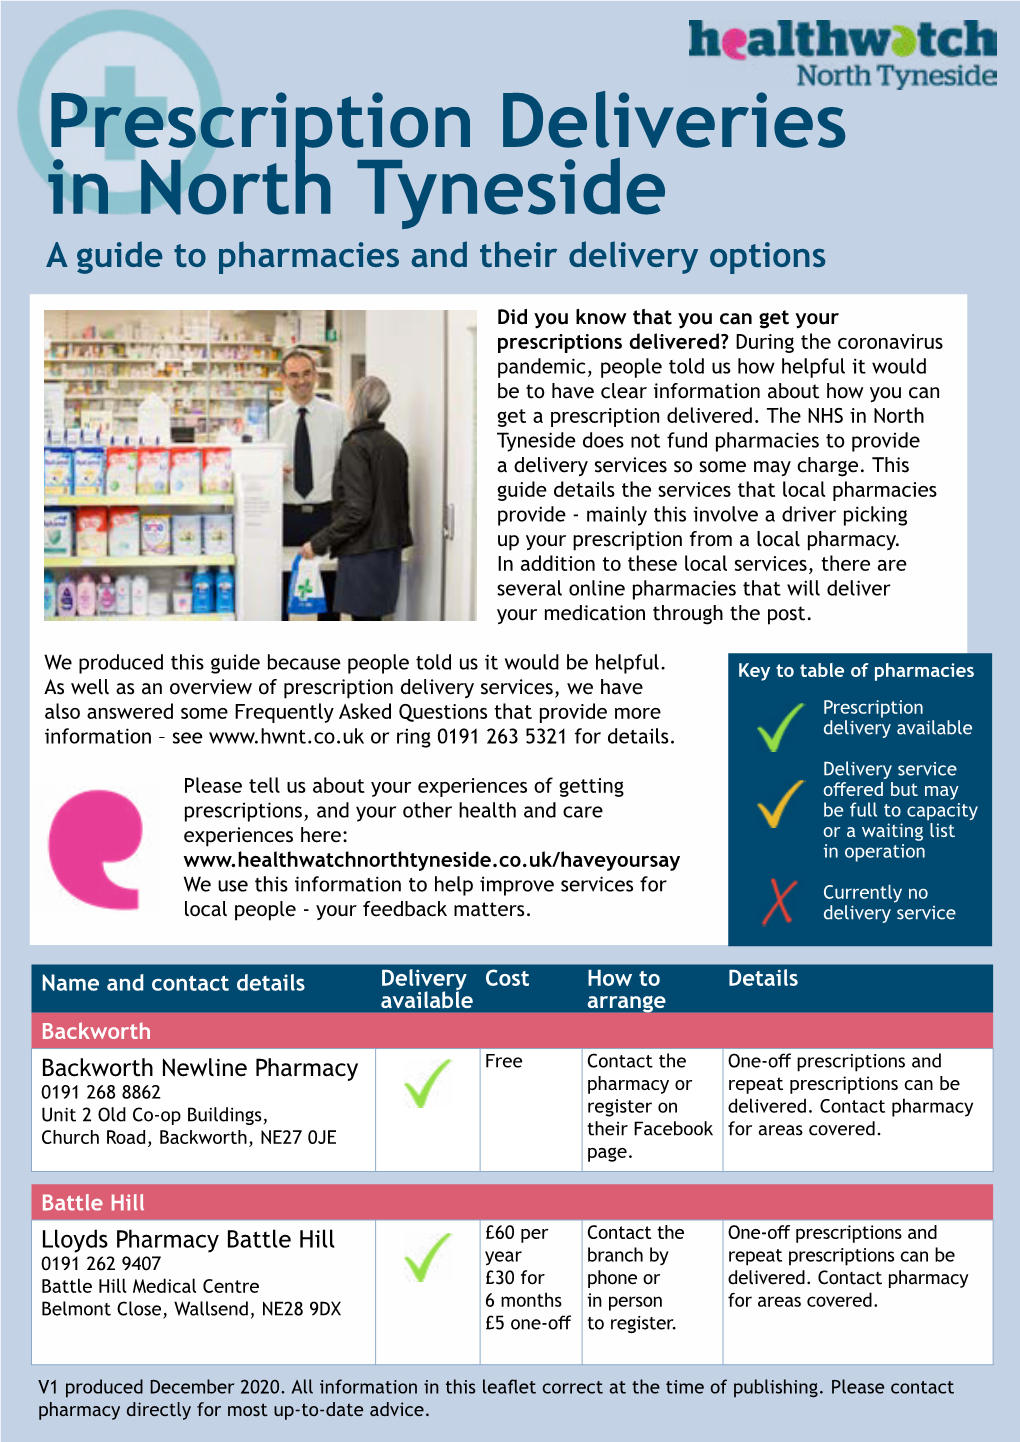 Prescription Deliveries in North Tyneside a Guide to Pharmacies and Their Delivery Options